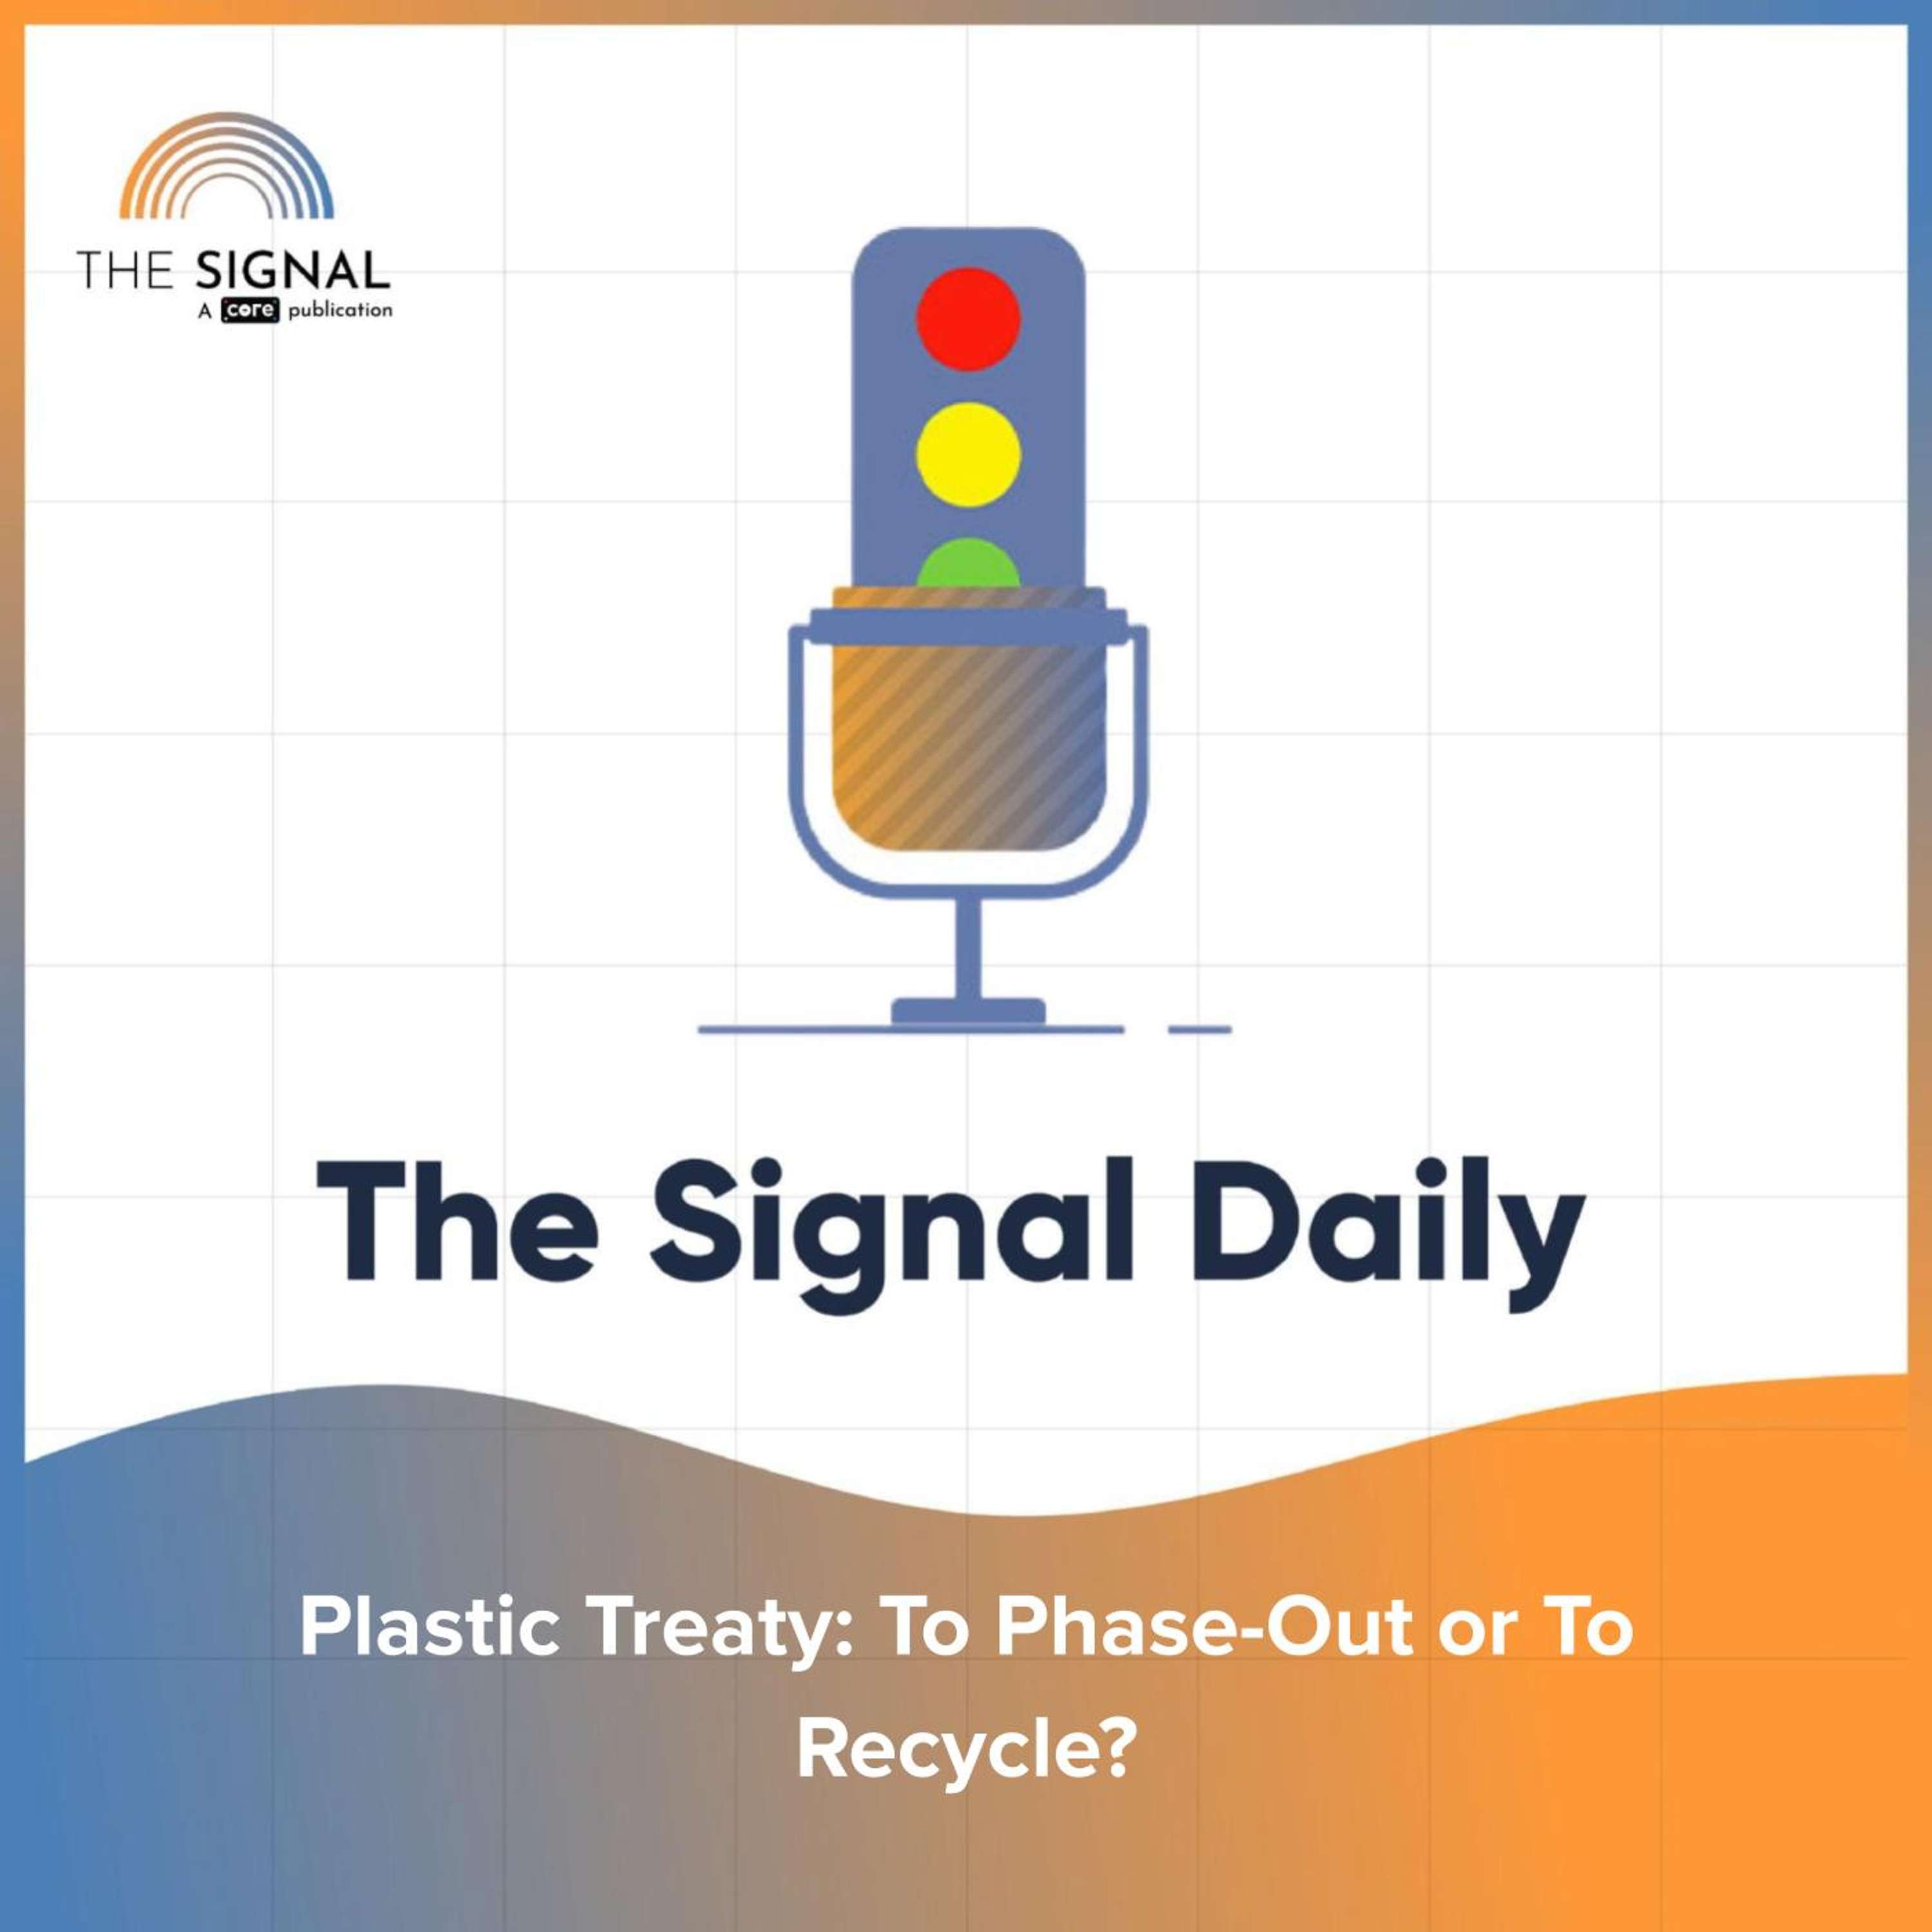 Plastic Treaty: To Phase-Out or To Recycle?